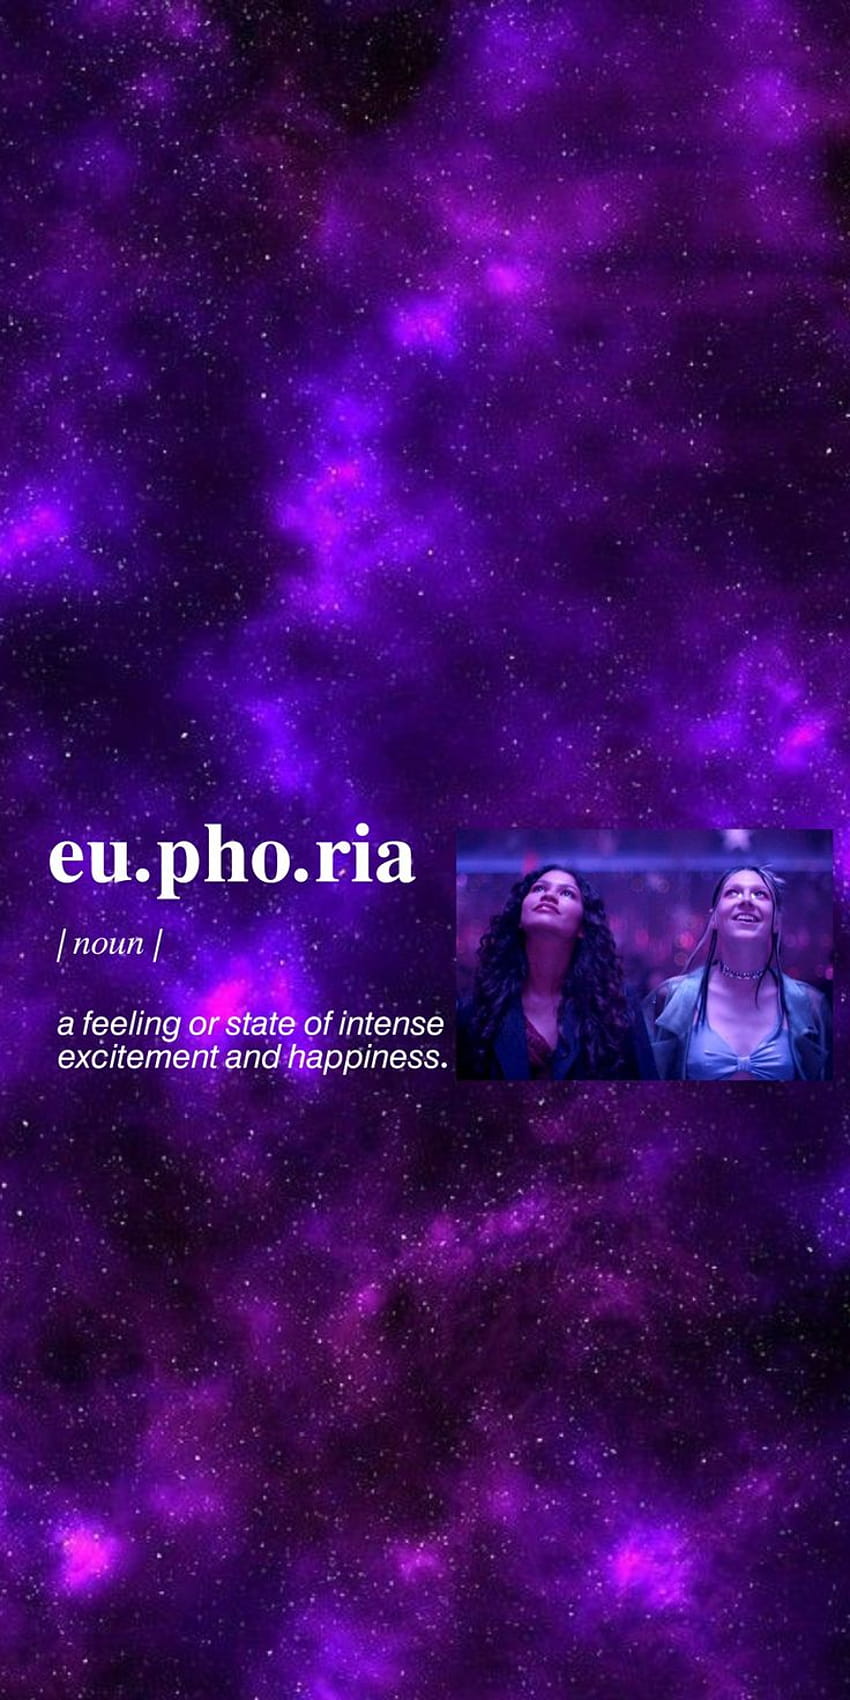 Two girls with purple background and text that reads euphoria - Euphoria